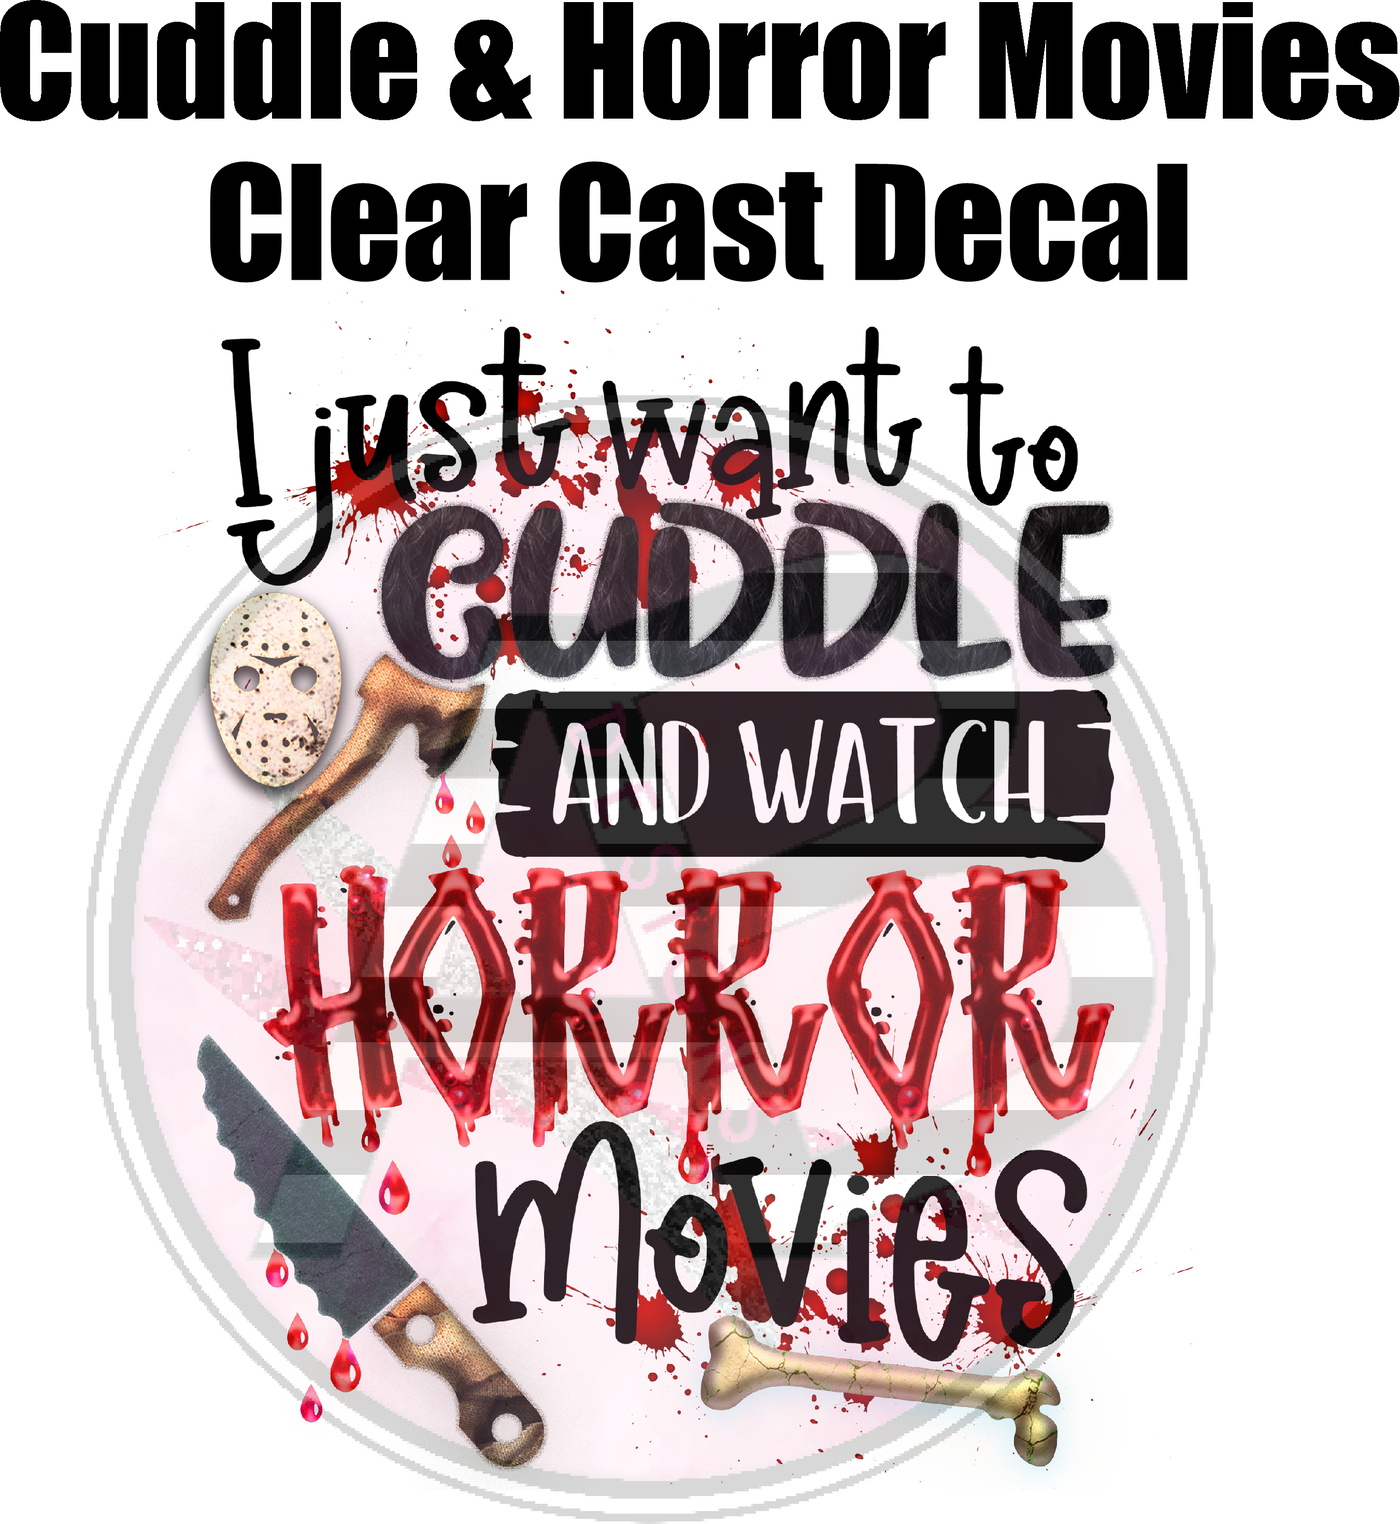 Cuddle and Horror Movies - Clear Cast Decal